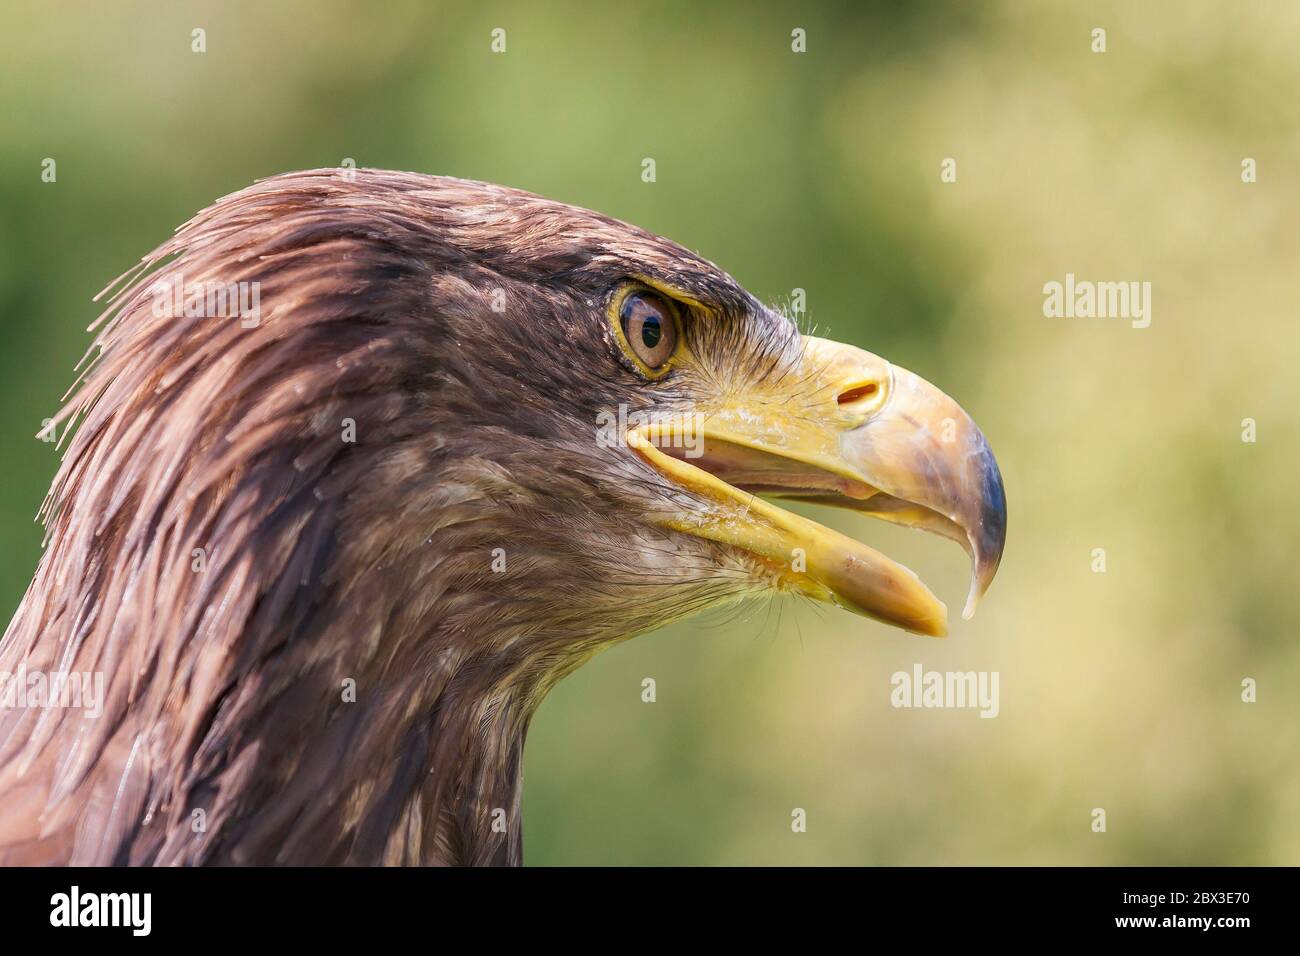 Portrait of a young bald eagle - Haliaeetus leucocephalus with nice green background Stock Photo